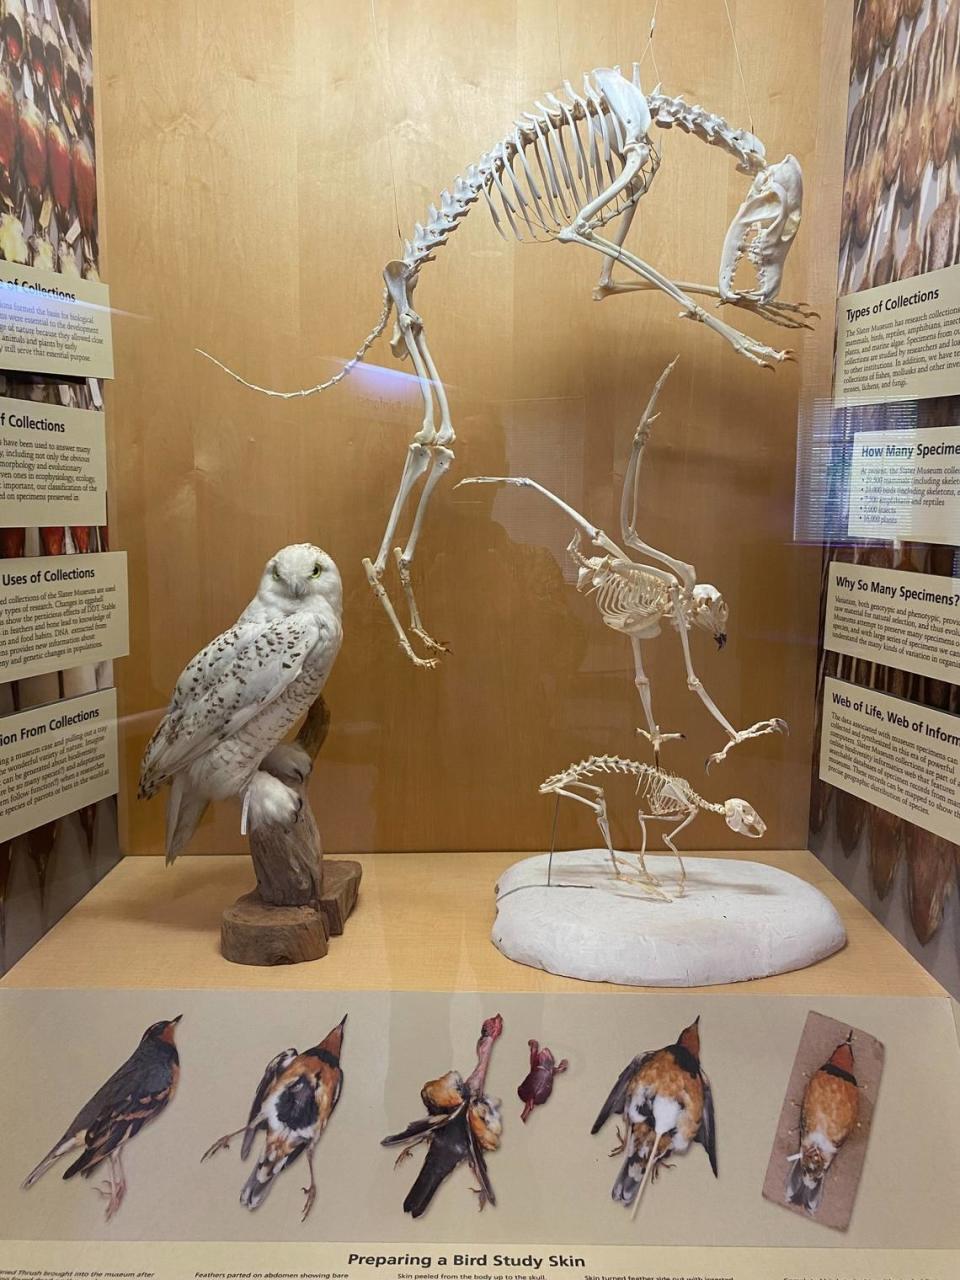 The Puget Sound Museum of Natural History houses over 100,000 bird, mammal, reptile, amphibian, plant, insect and geological specimens.